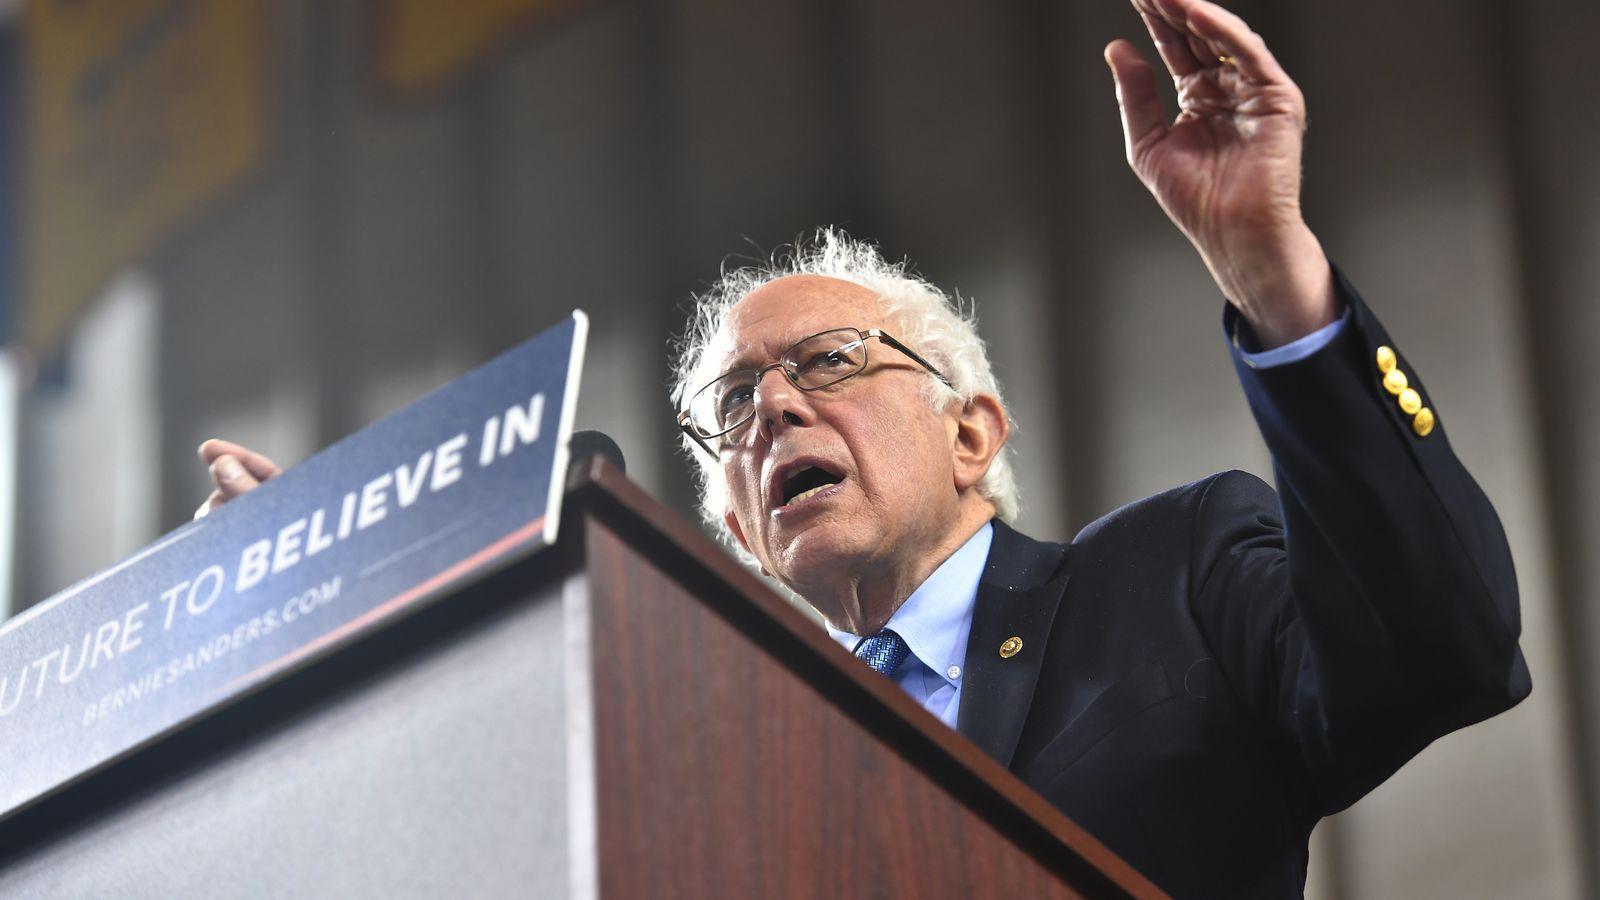 Why I think Bernie Sanders has stayed in the race so long